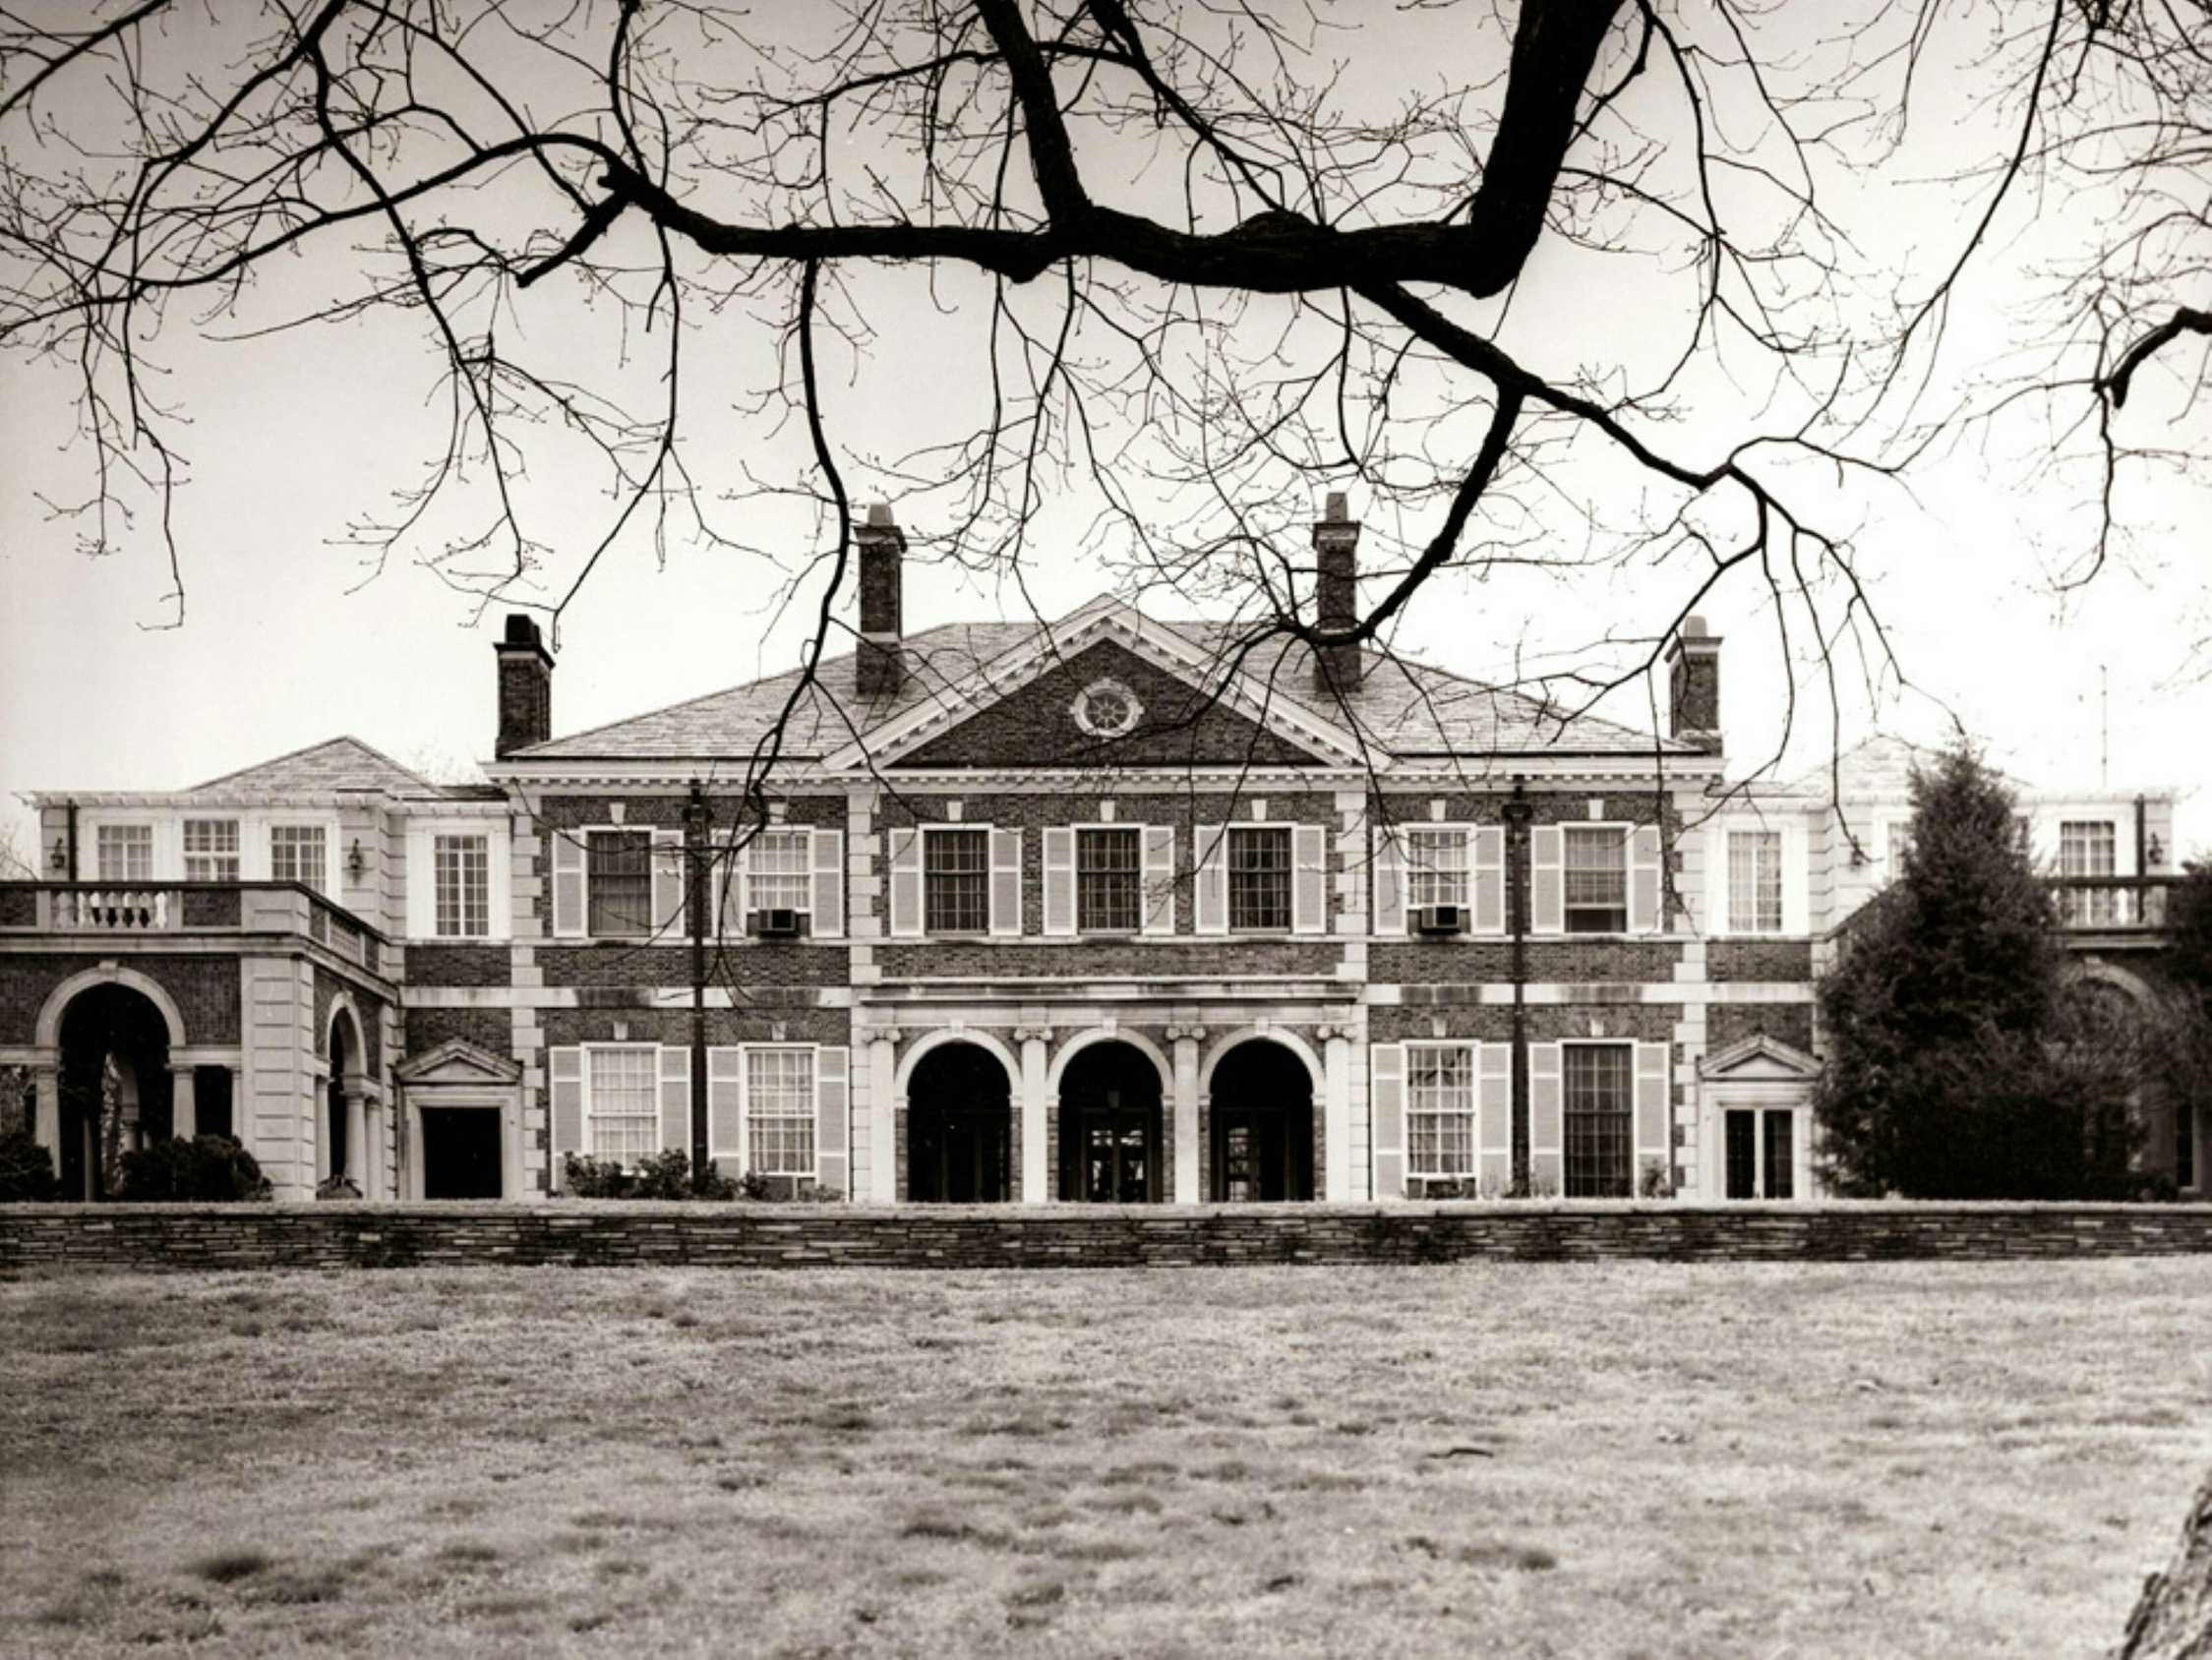 Governors Mansion